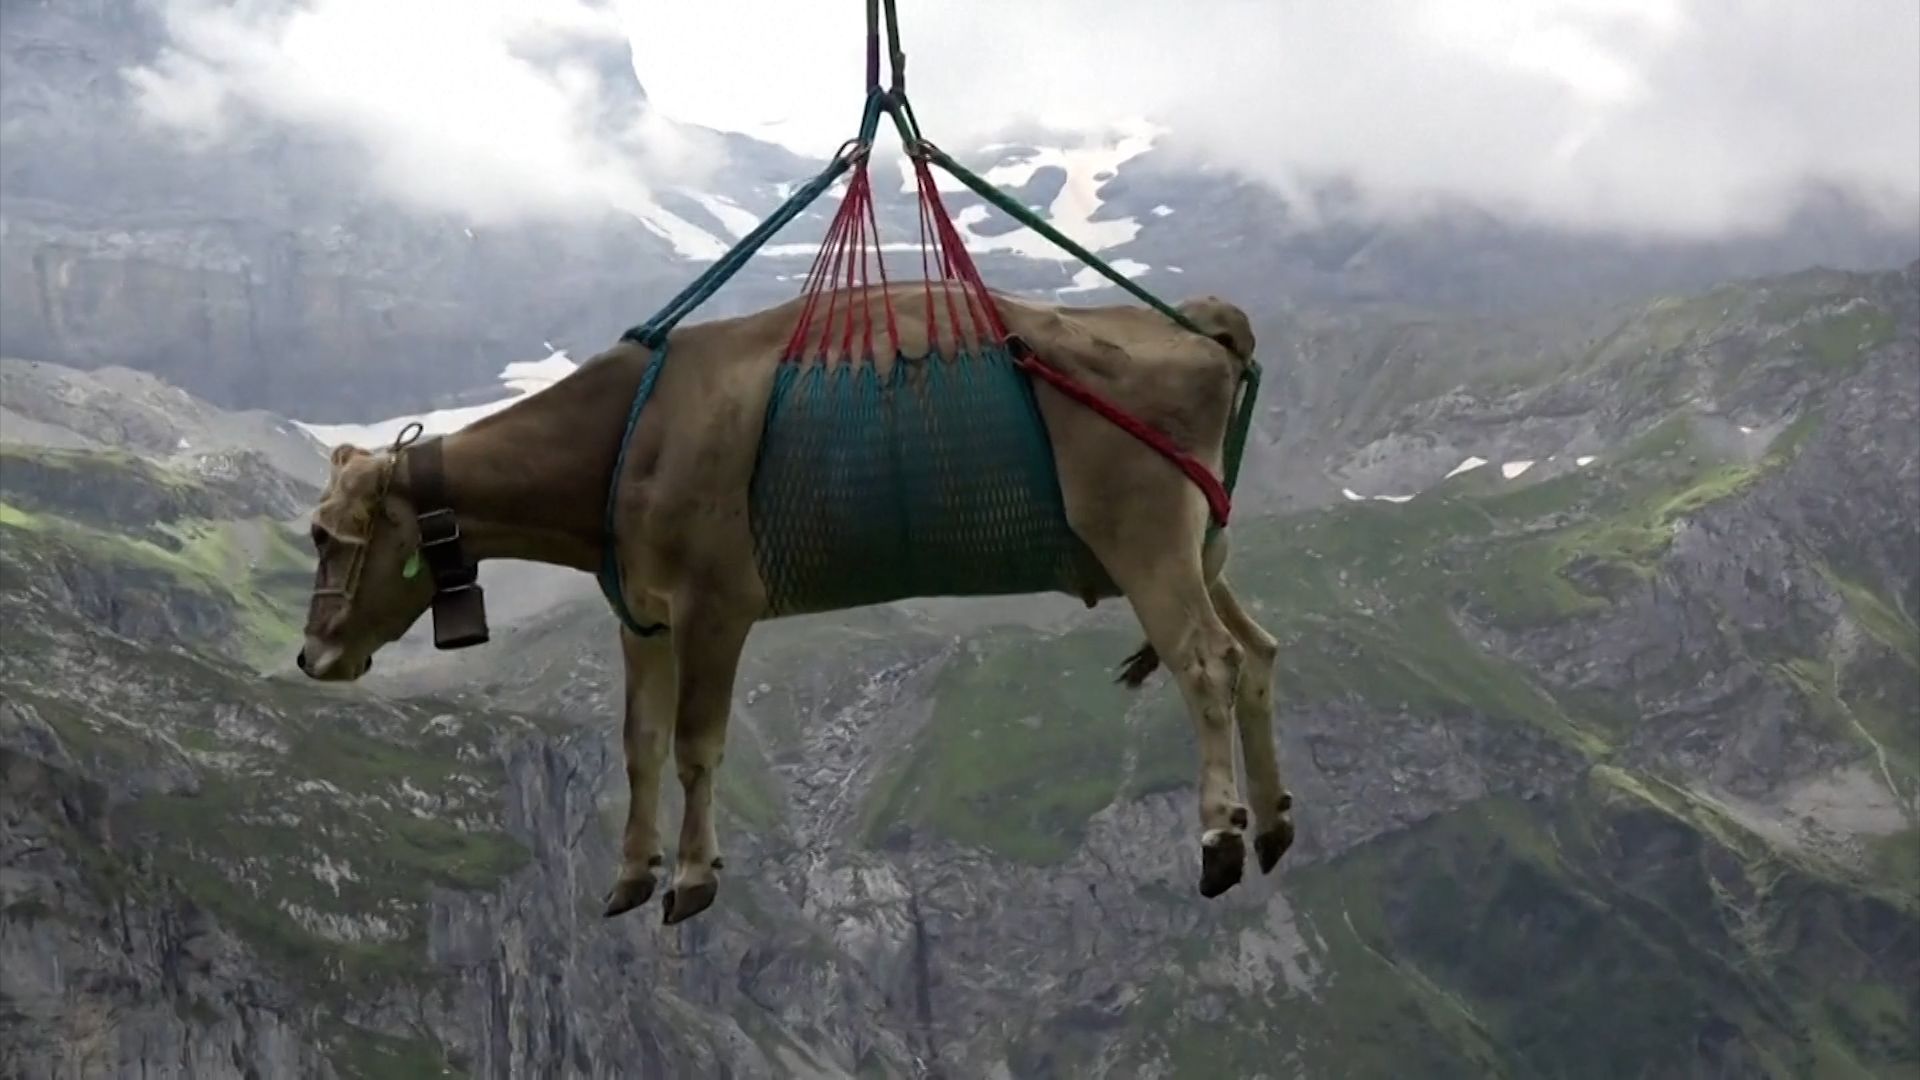 Swiss cows airlifted to lower mountain pastures: Watch the video | CNN